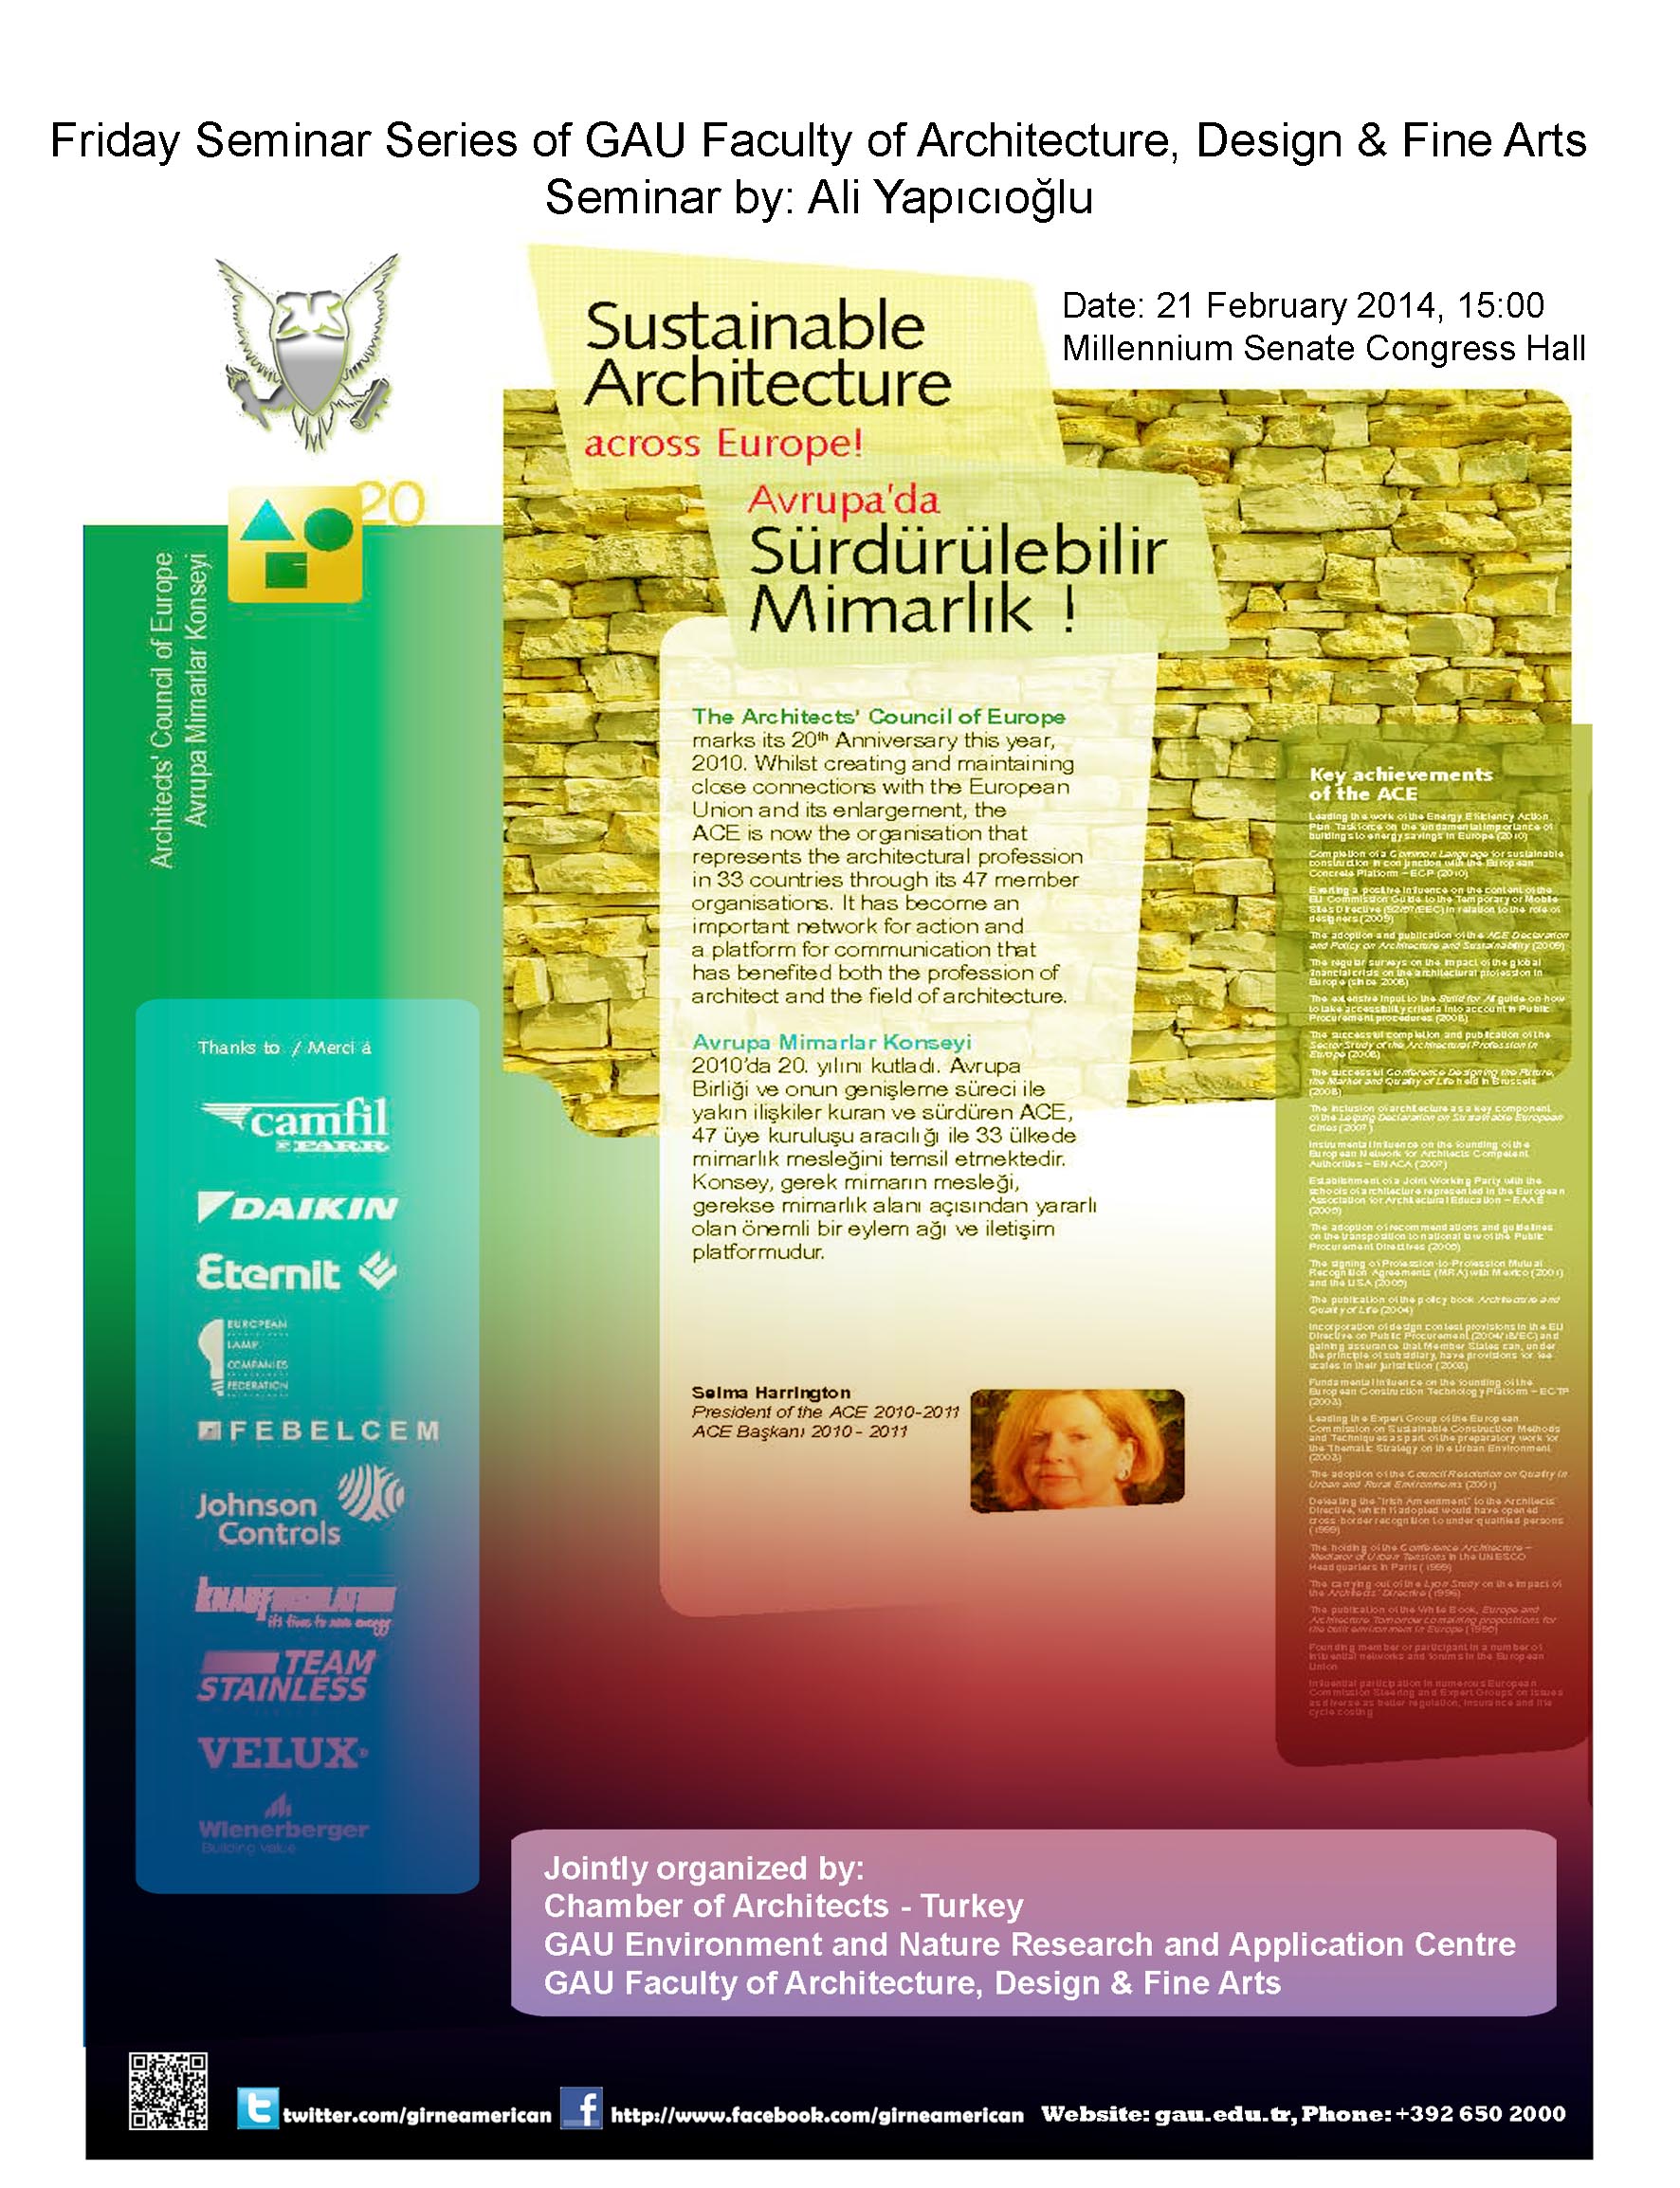 9th Friday Seminar: Sustainable Architecture across Europe